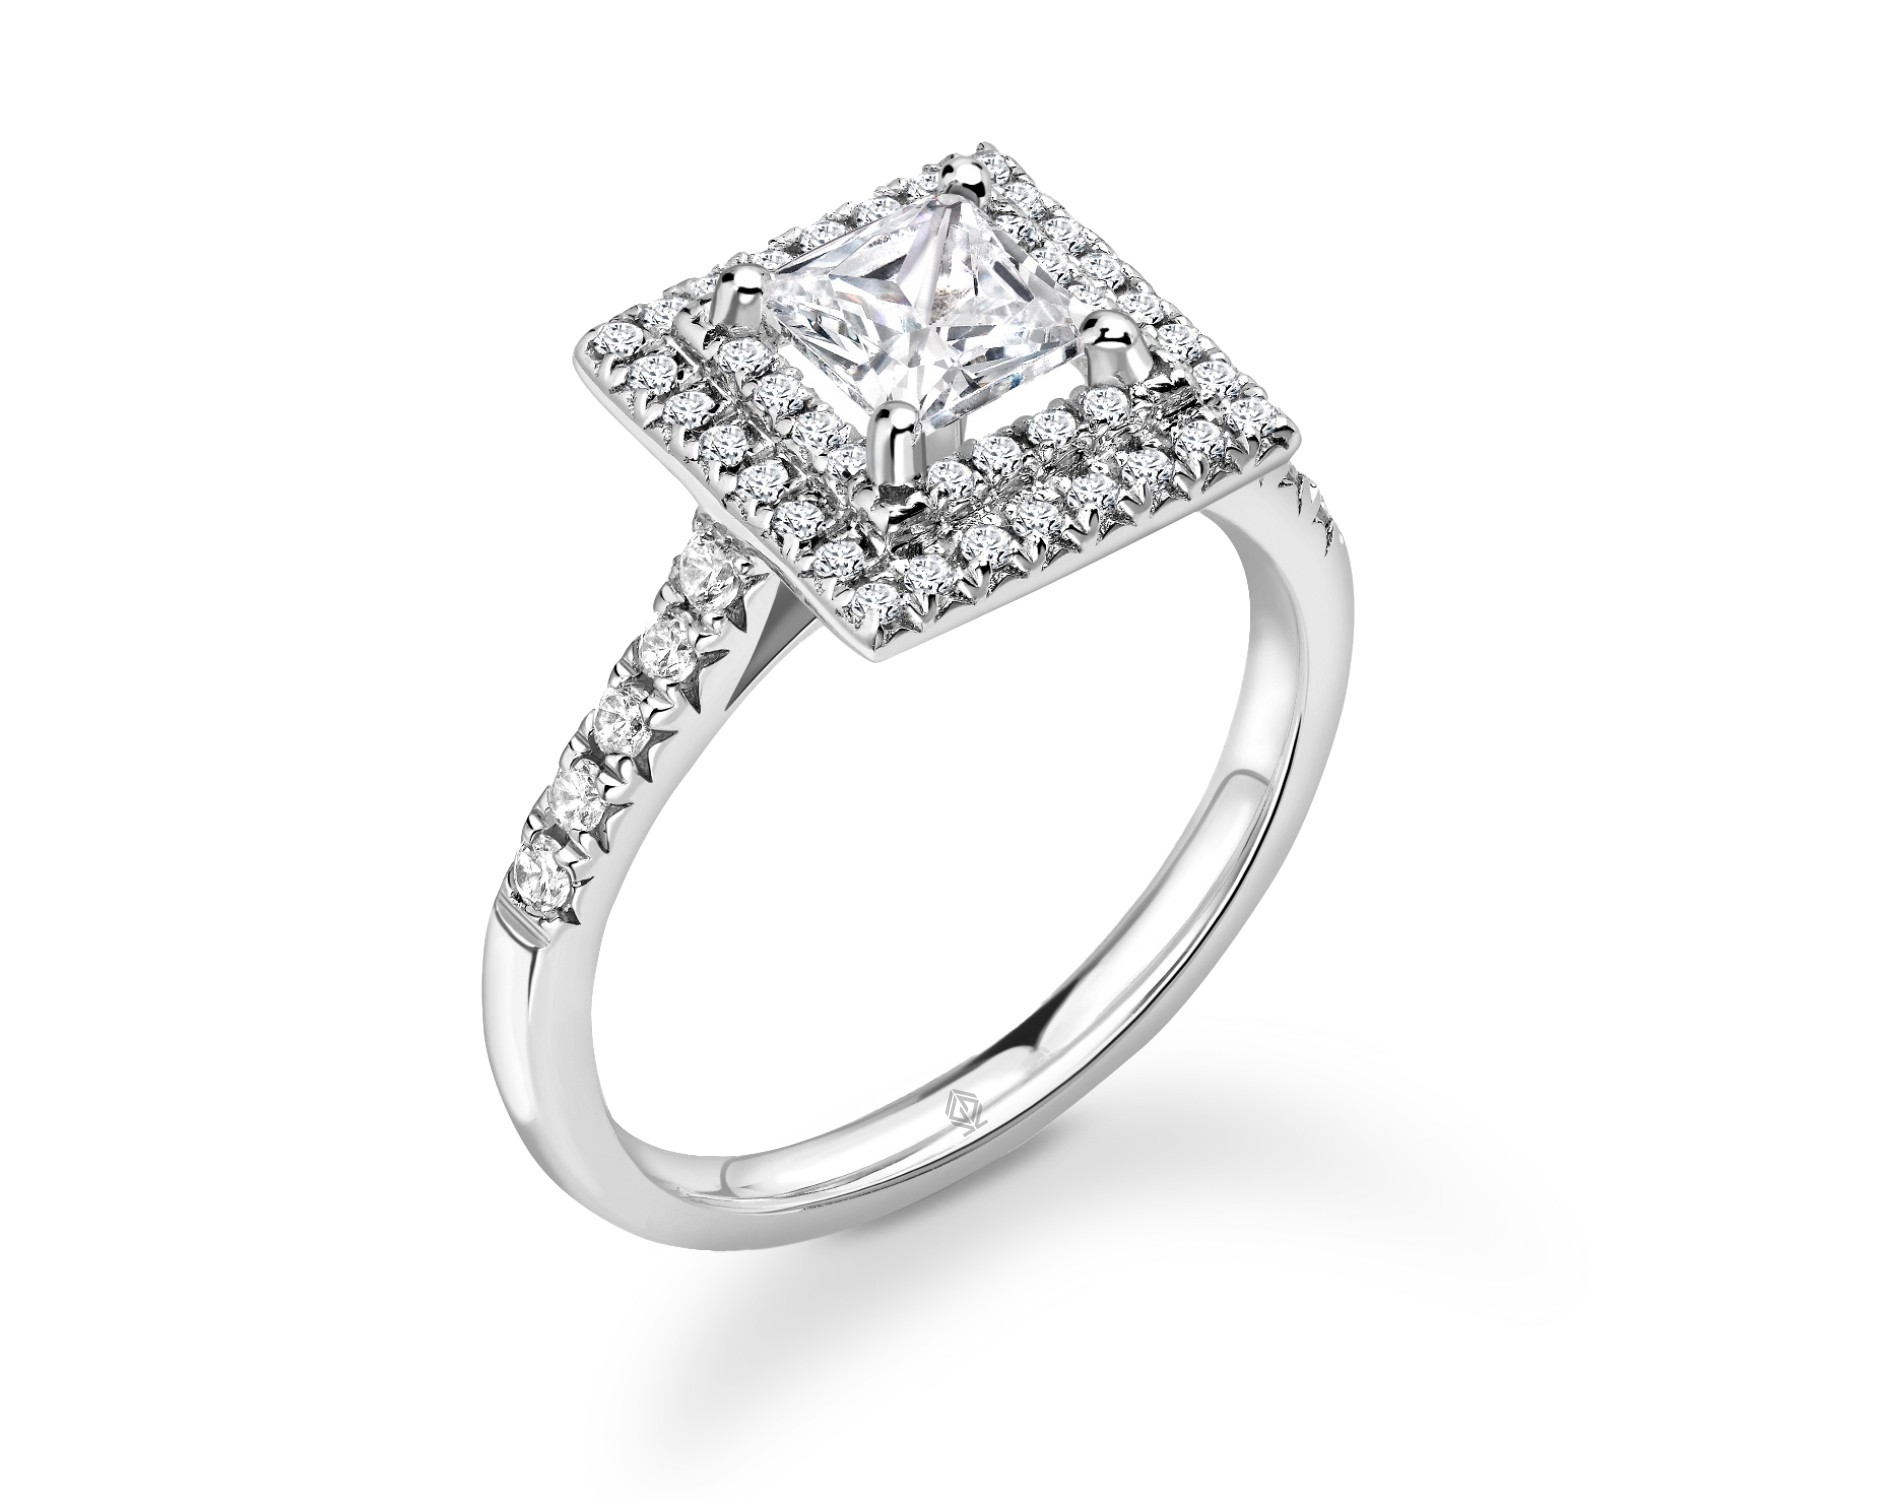 18K WHITE GOLD DOUBLE HALO PRINCESS CUT DIAMOND ENGAGEMENT RING WITH SIDE STONES PAVE SET